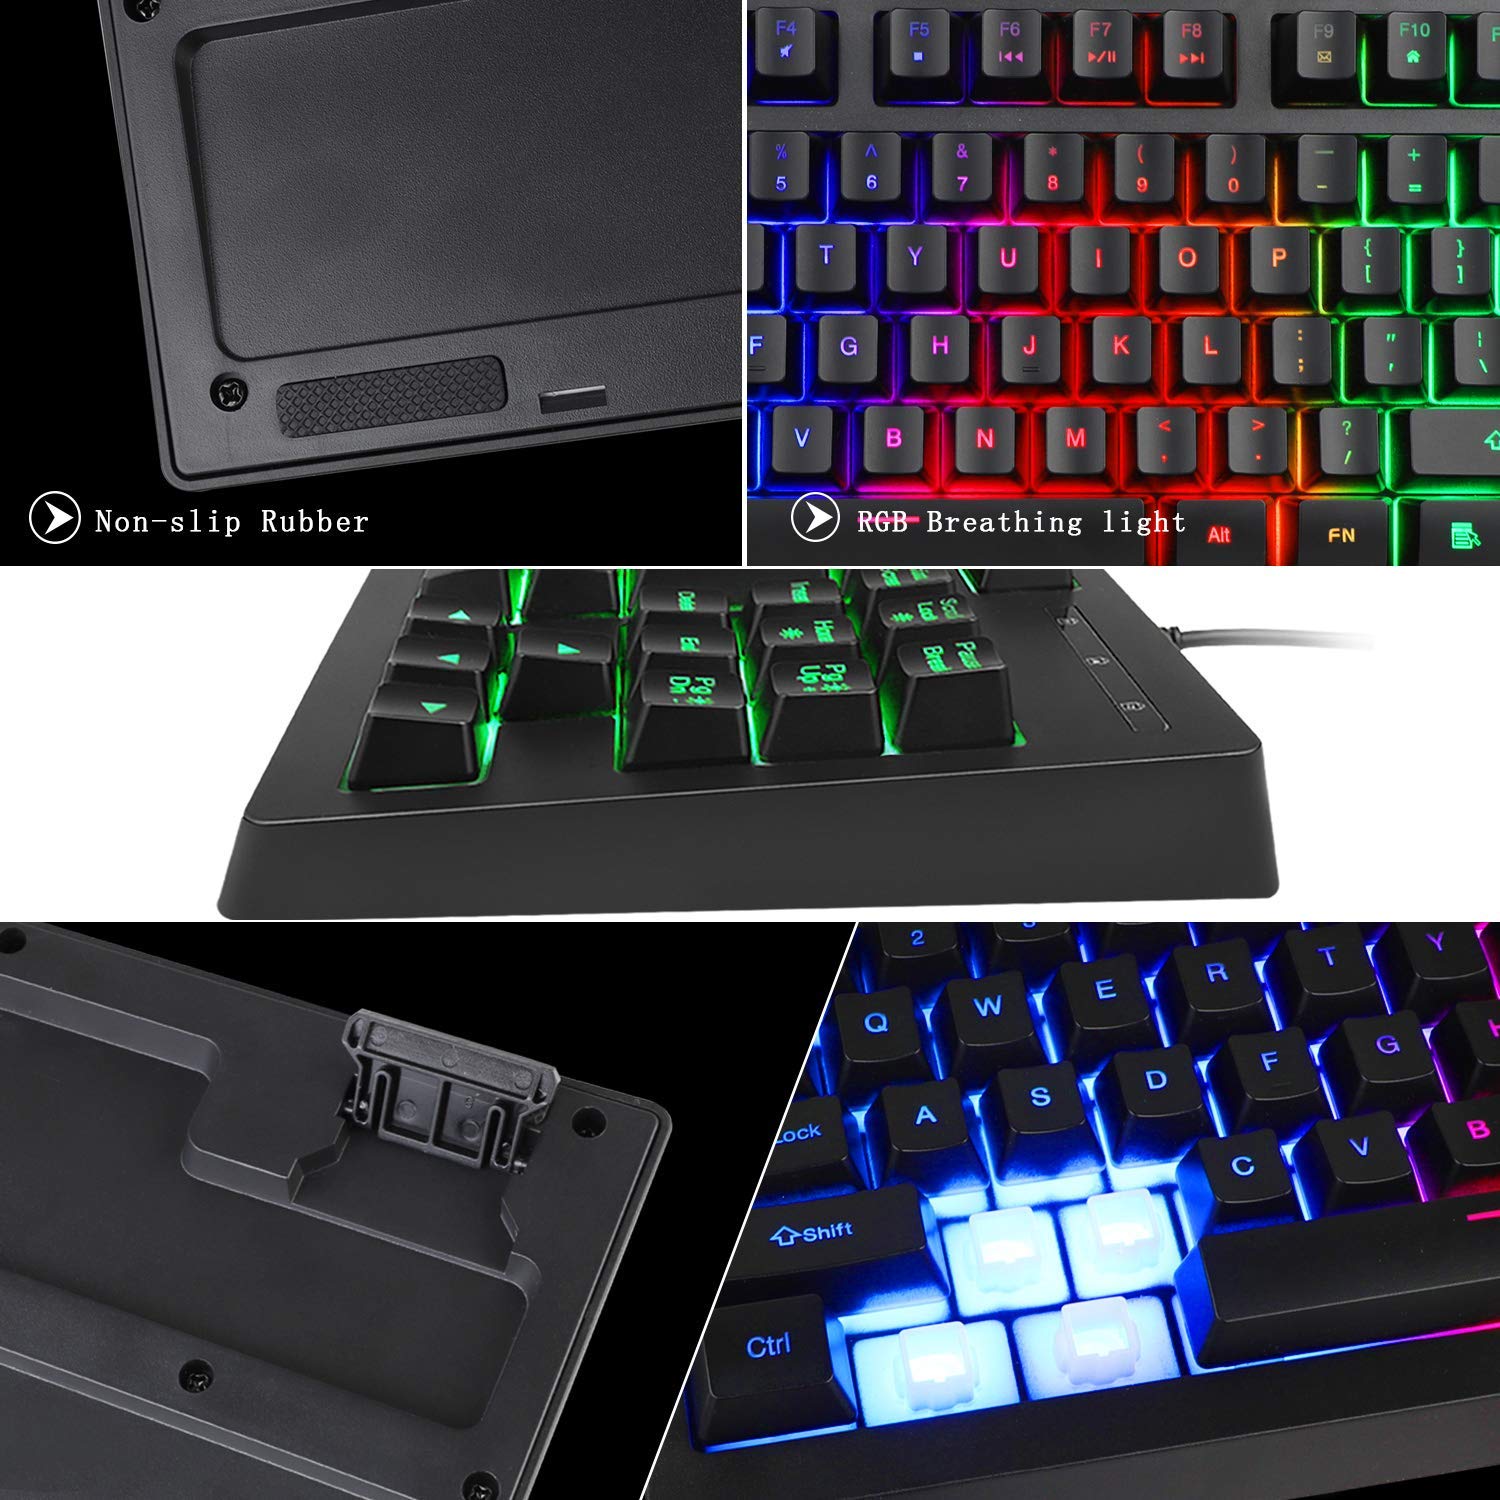 RGB 87 Keys Gaming Keyboard and Backlit Mouse Combo,BlueFinger USB Wired Rainbow Keyboard,Gaming Keyboard Set for Laptop PC Computer Game and Work - amzGamess